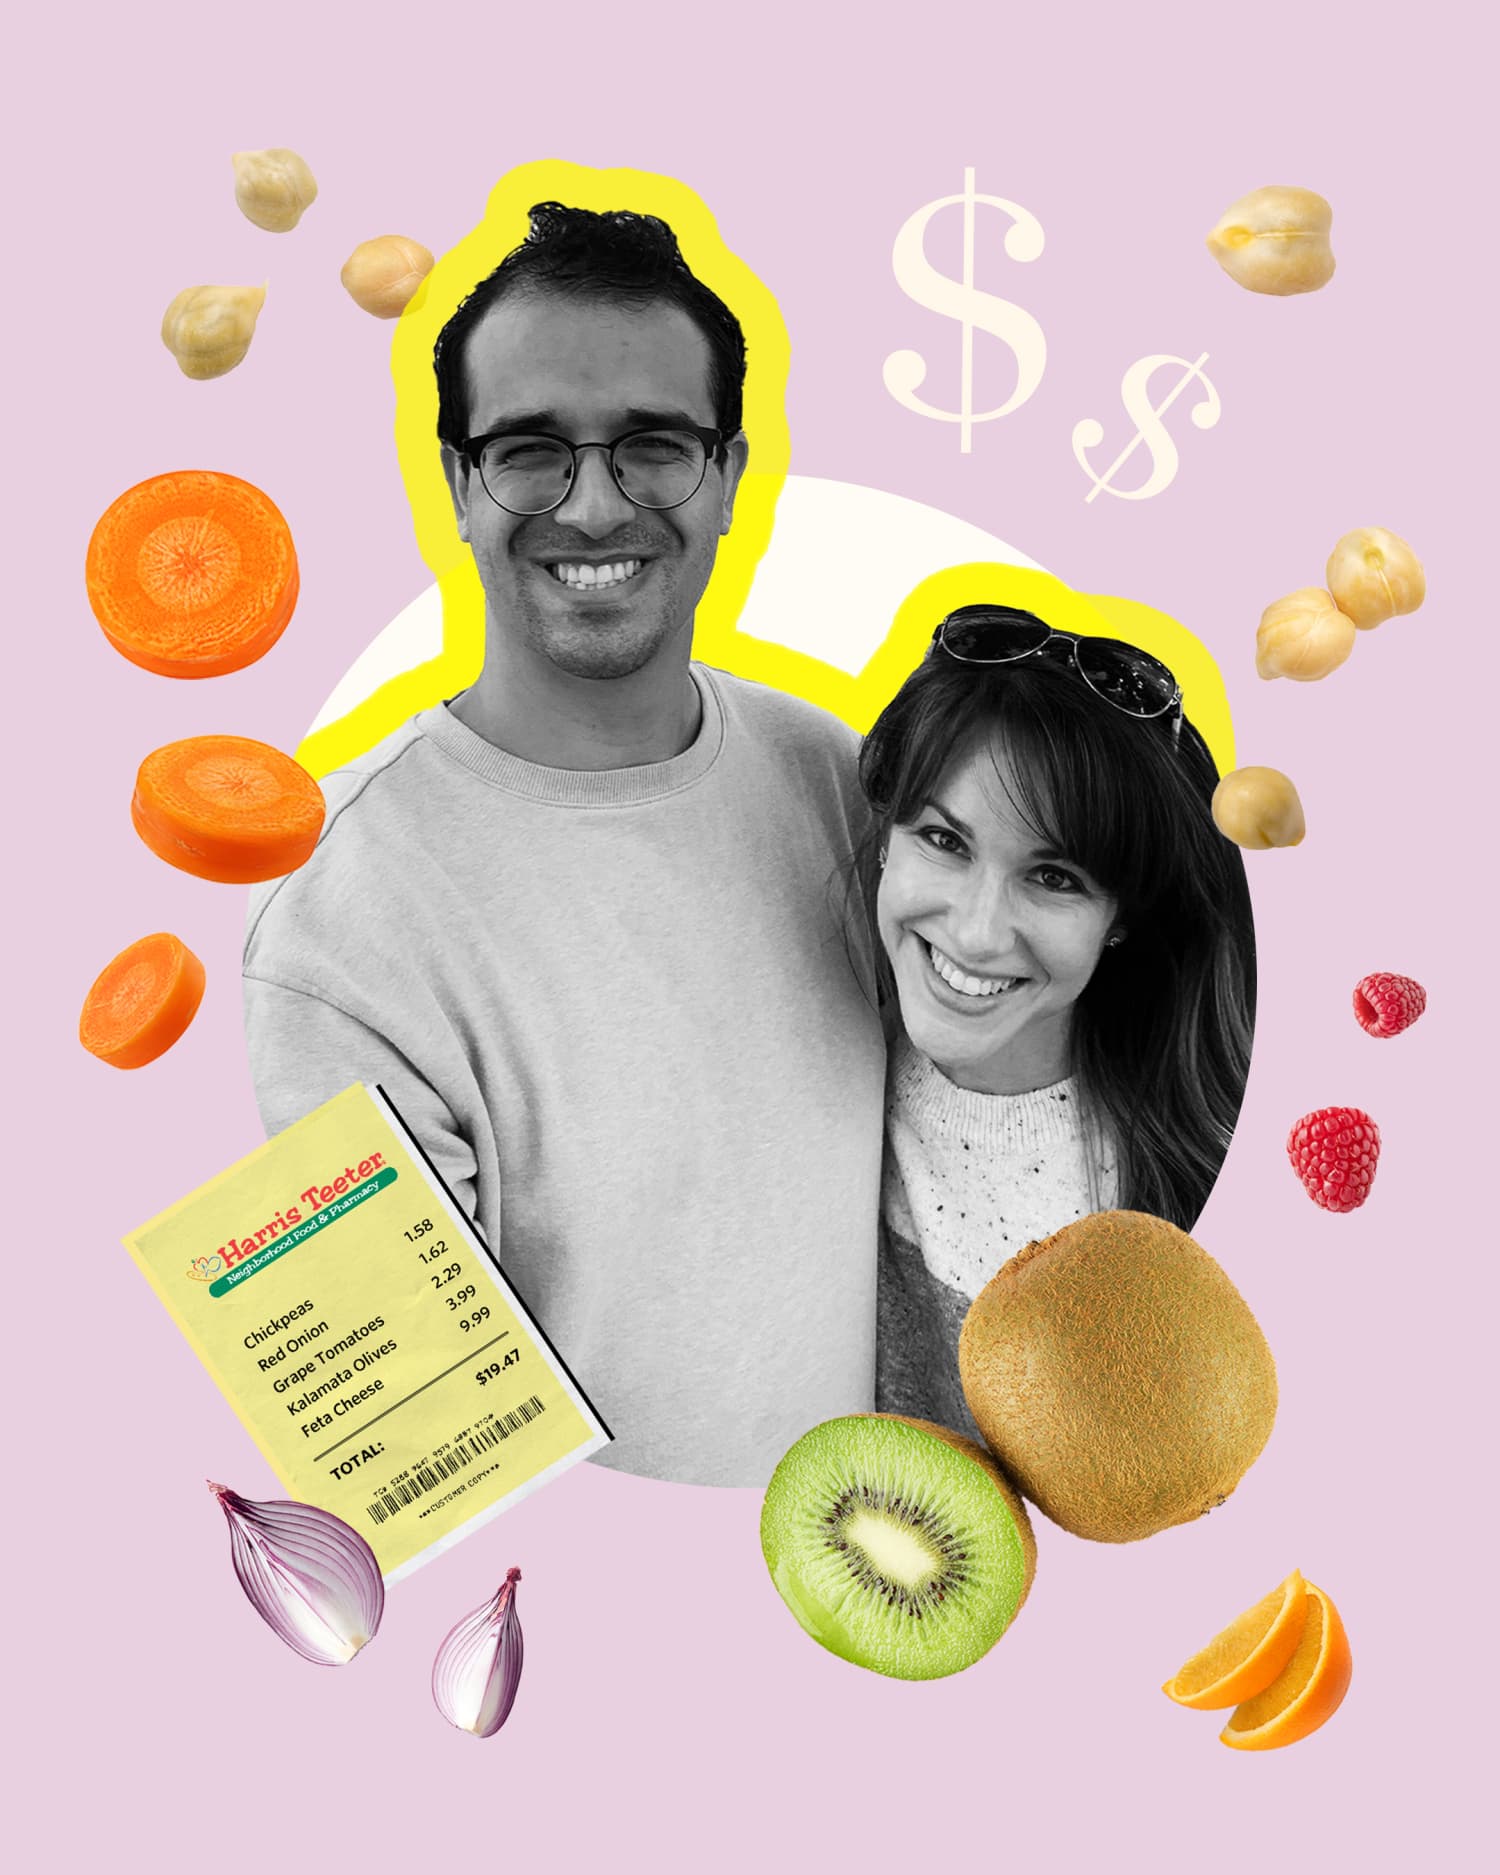 I’m a Human Resources Program Manager and My Husband Is a Medical Resident — We Spent $62 on a Week’s Worth of Groceries